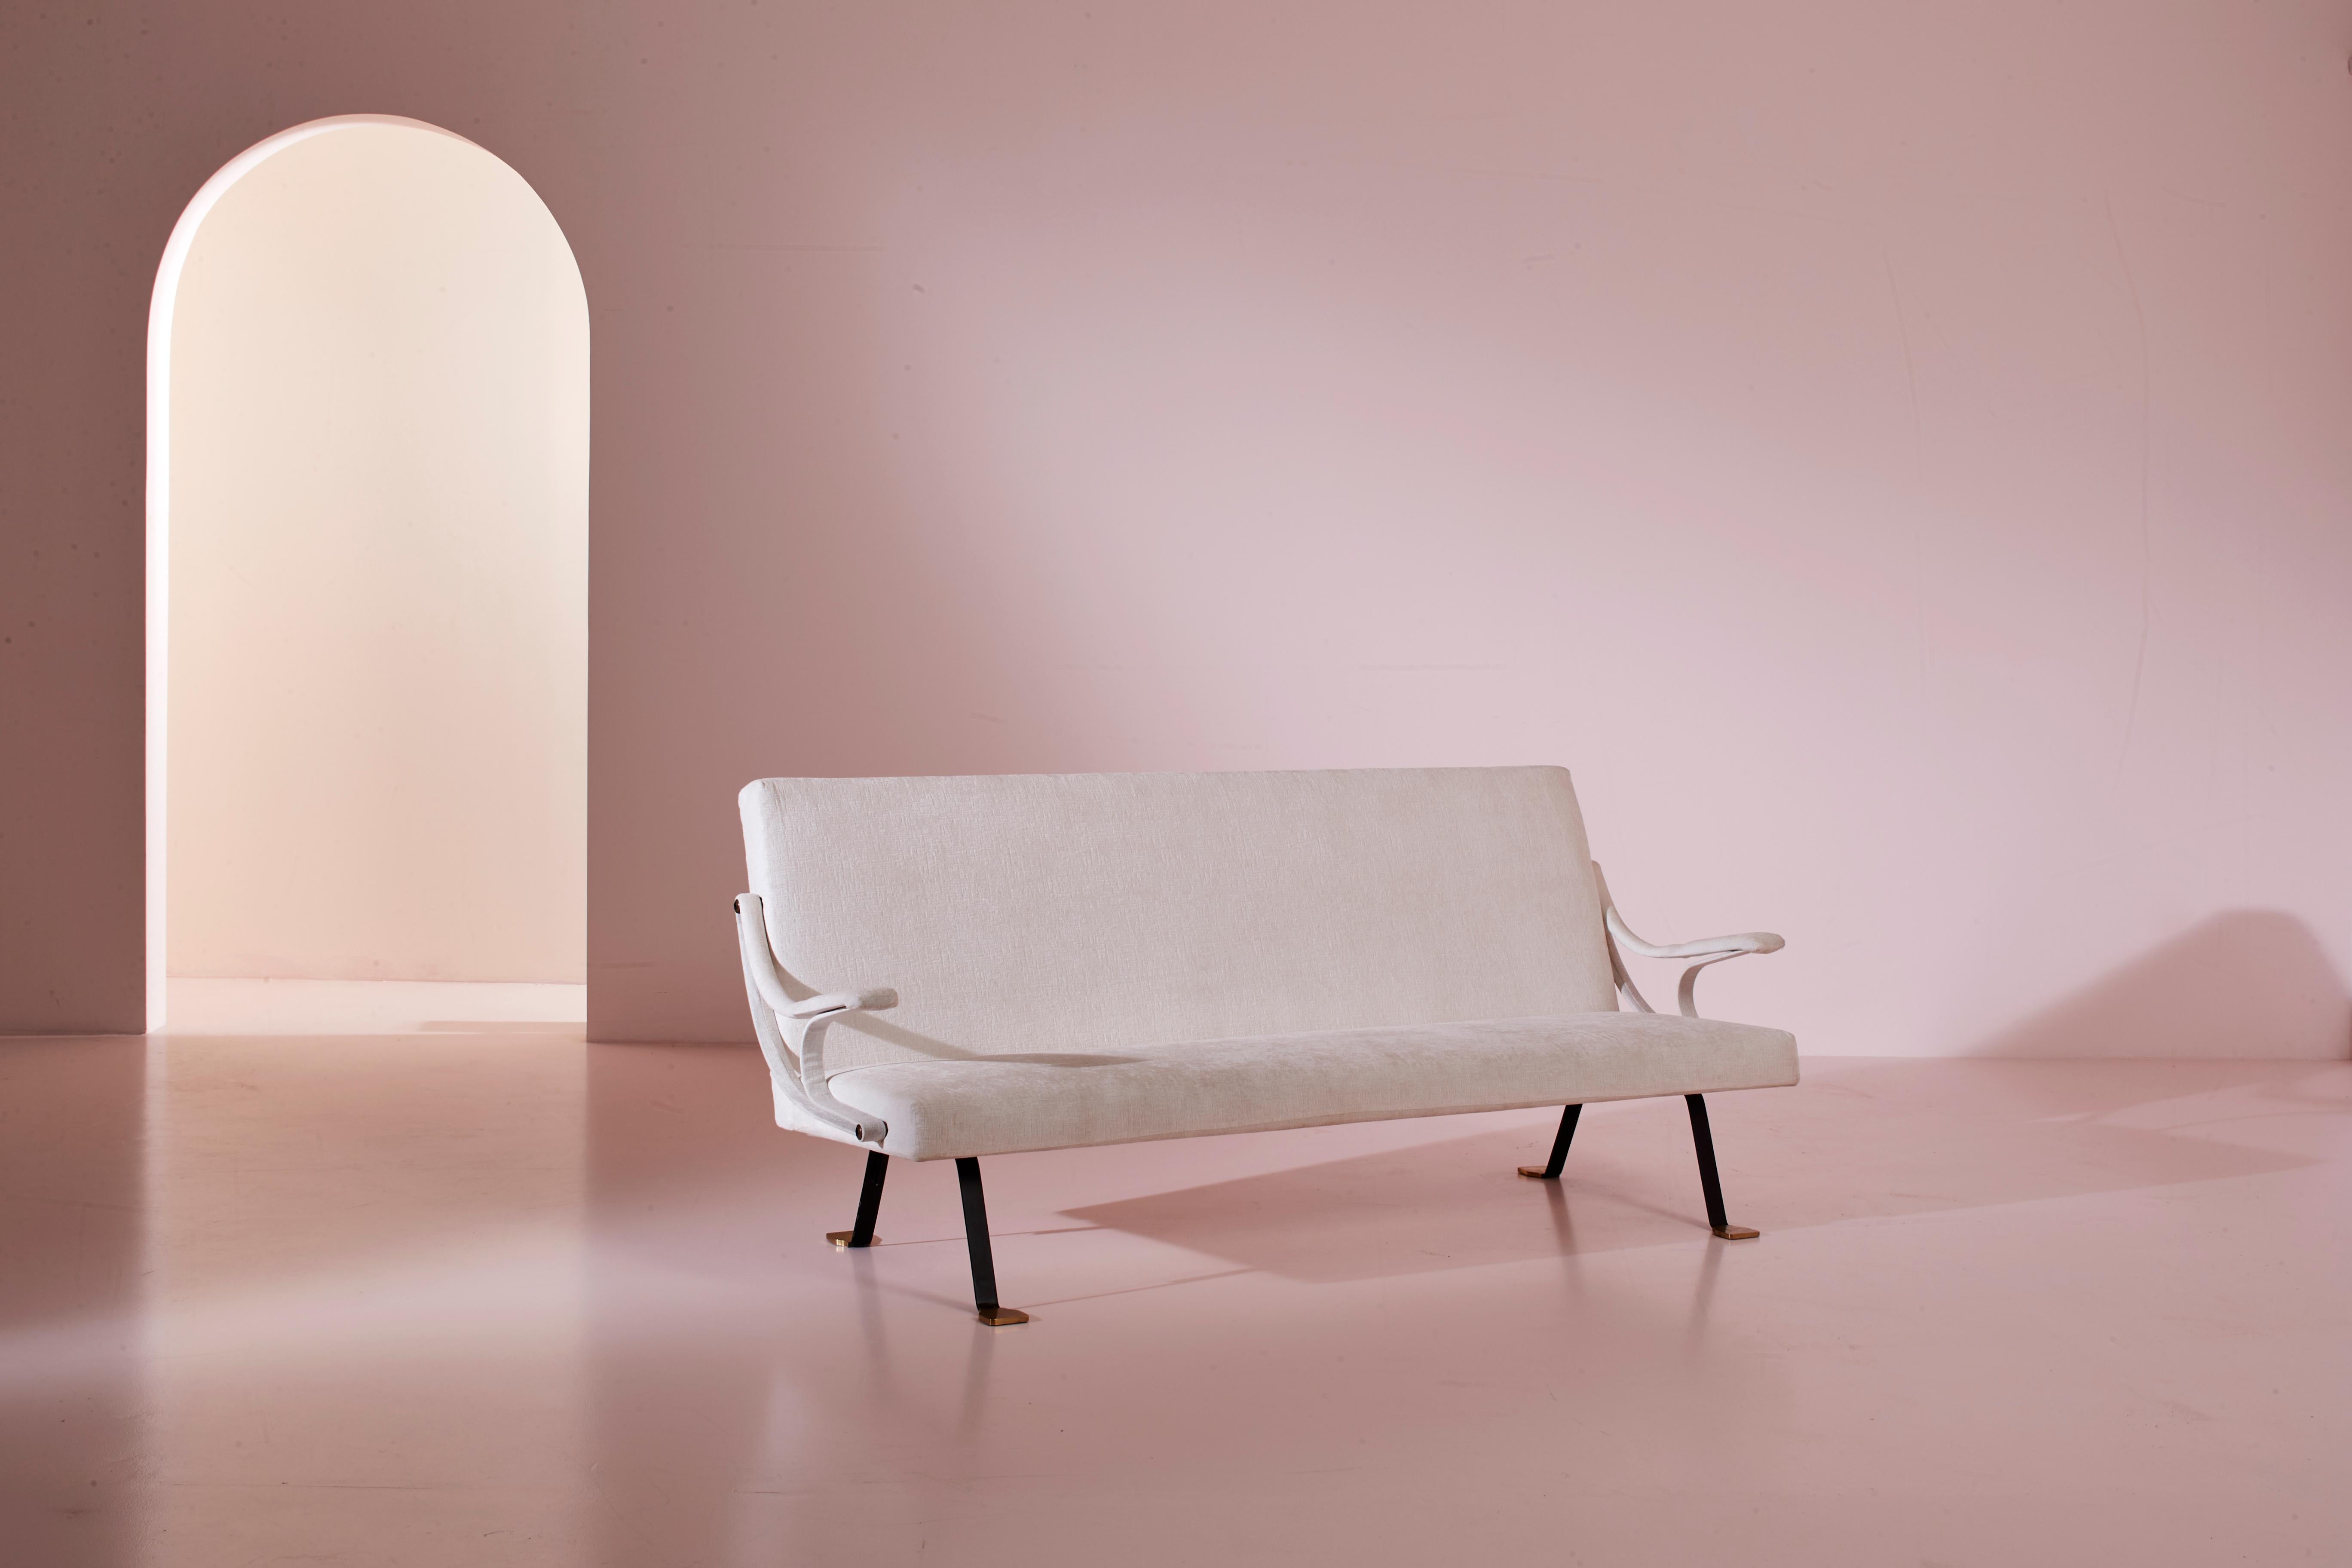 Three-seater white velvet sofa with metal and brass, Digamma model designed by Ignazio Gardella for Gavina in 1957.

The extraordinary elegance of the Digamma three-seater sofa, created in 1957 by Ignazio Gardella for Gavina, is revealed through a